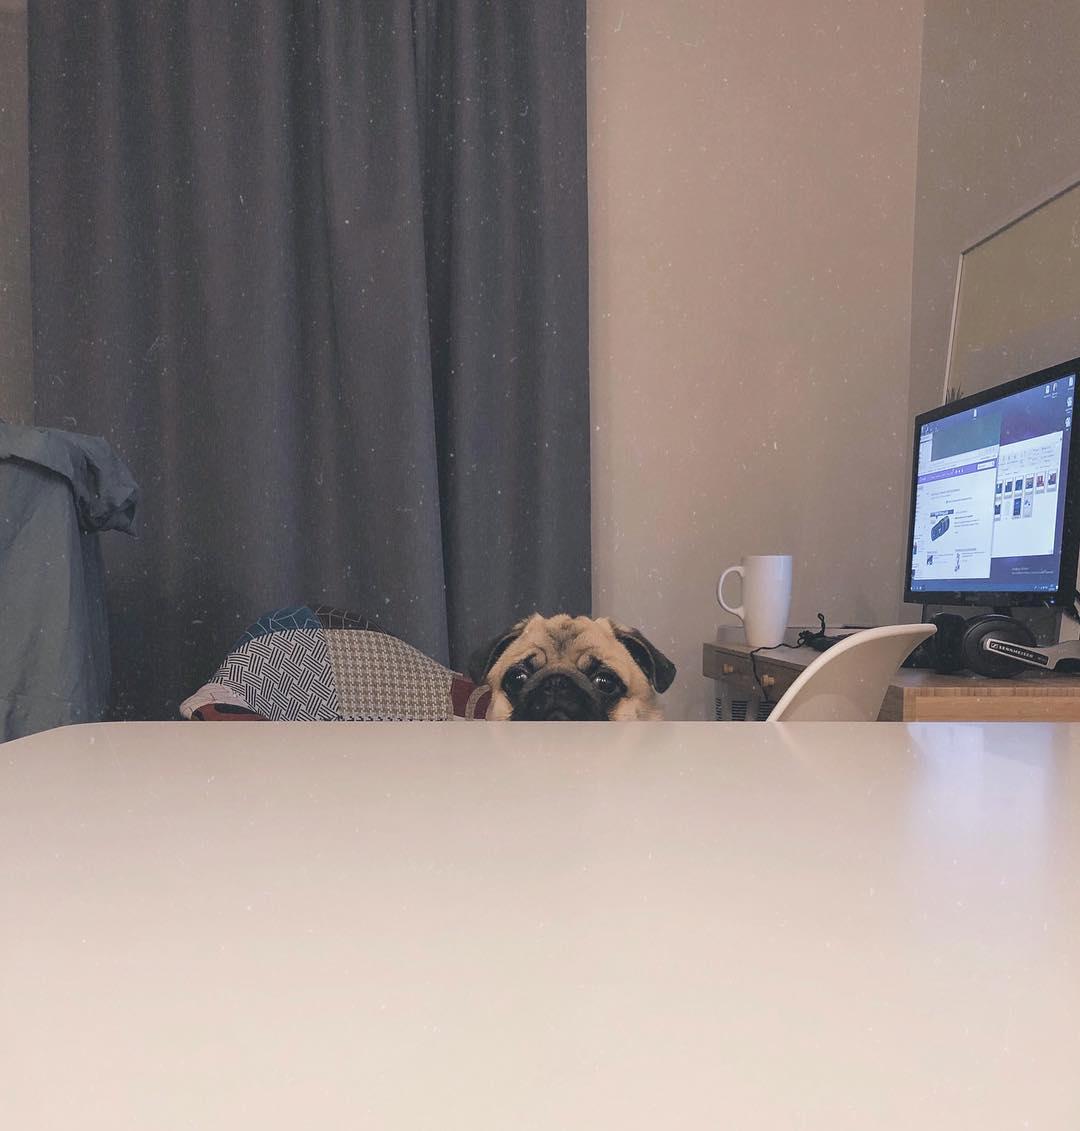 A Pug on the chair peeking behind the table